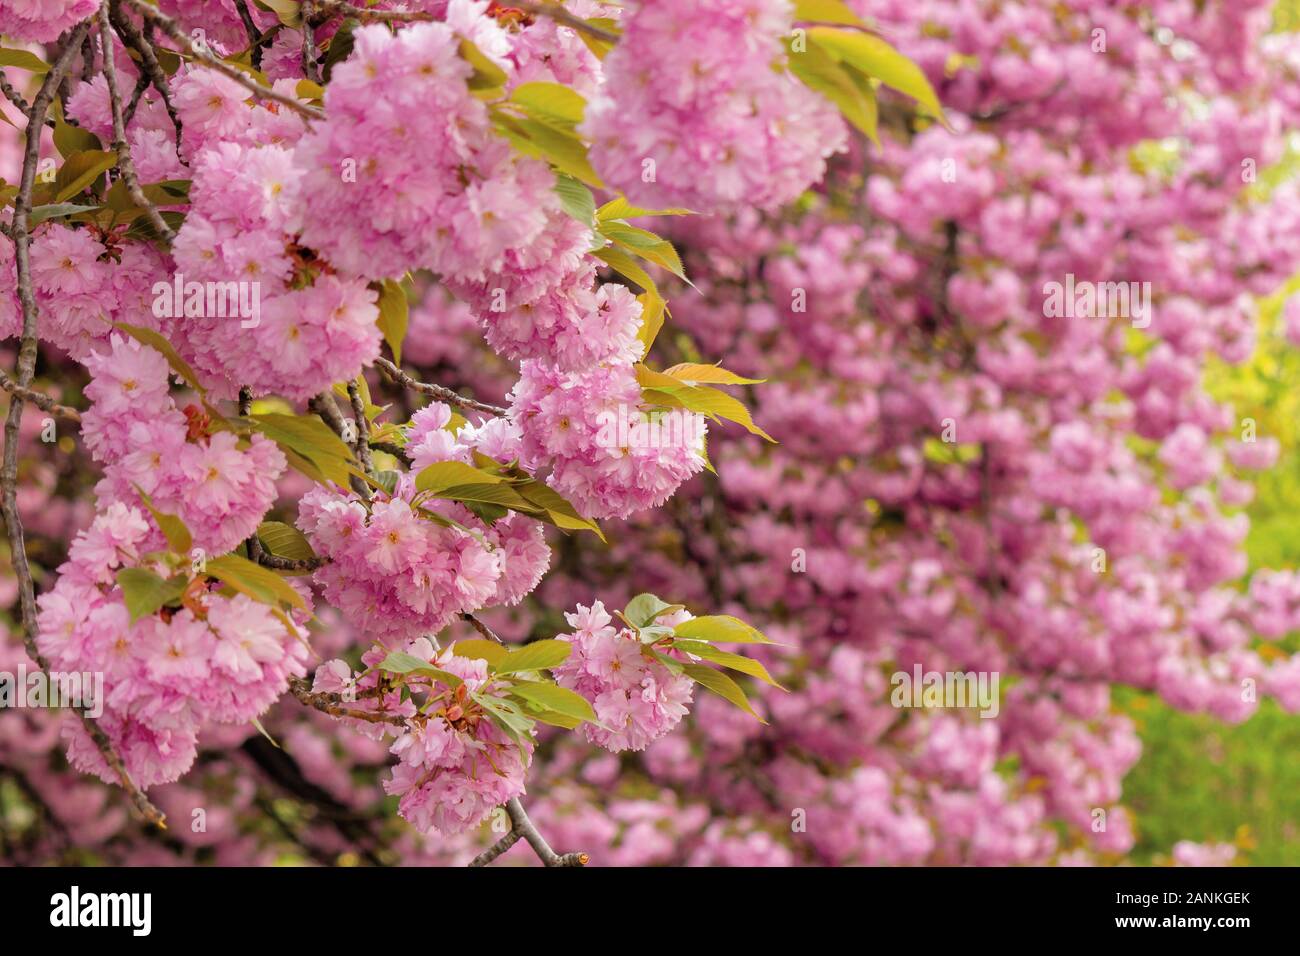 cherry blossom in the park. awesom springtime nature scenery. close up of blooming twigs of sakura trees. wonderful color combination of pink flowers Stock Photo